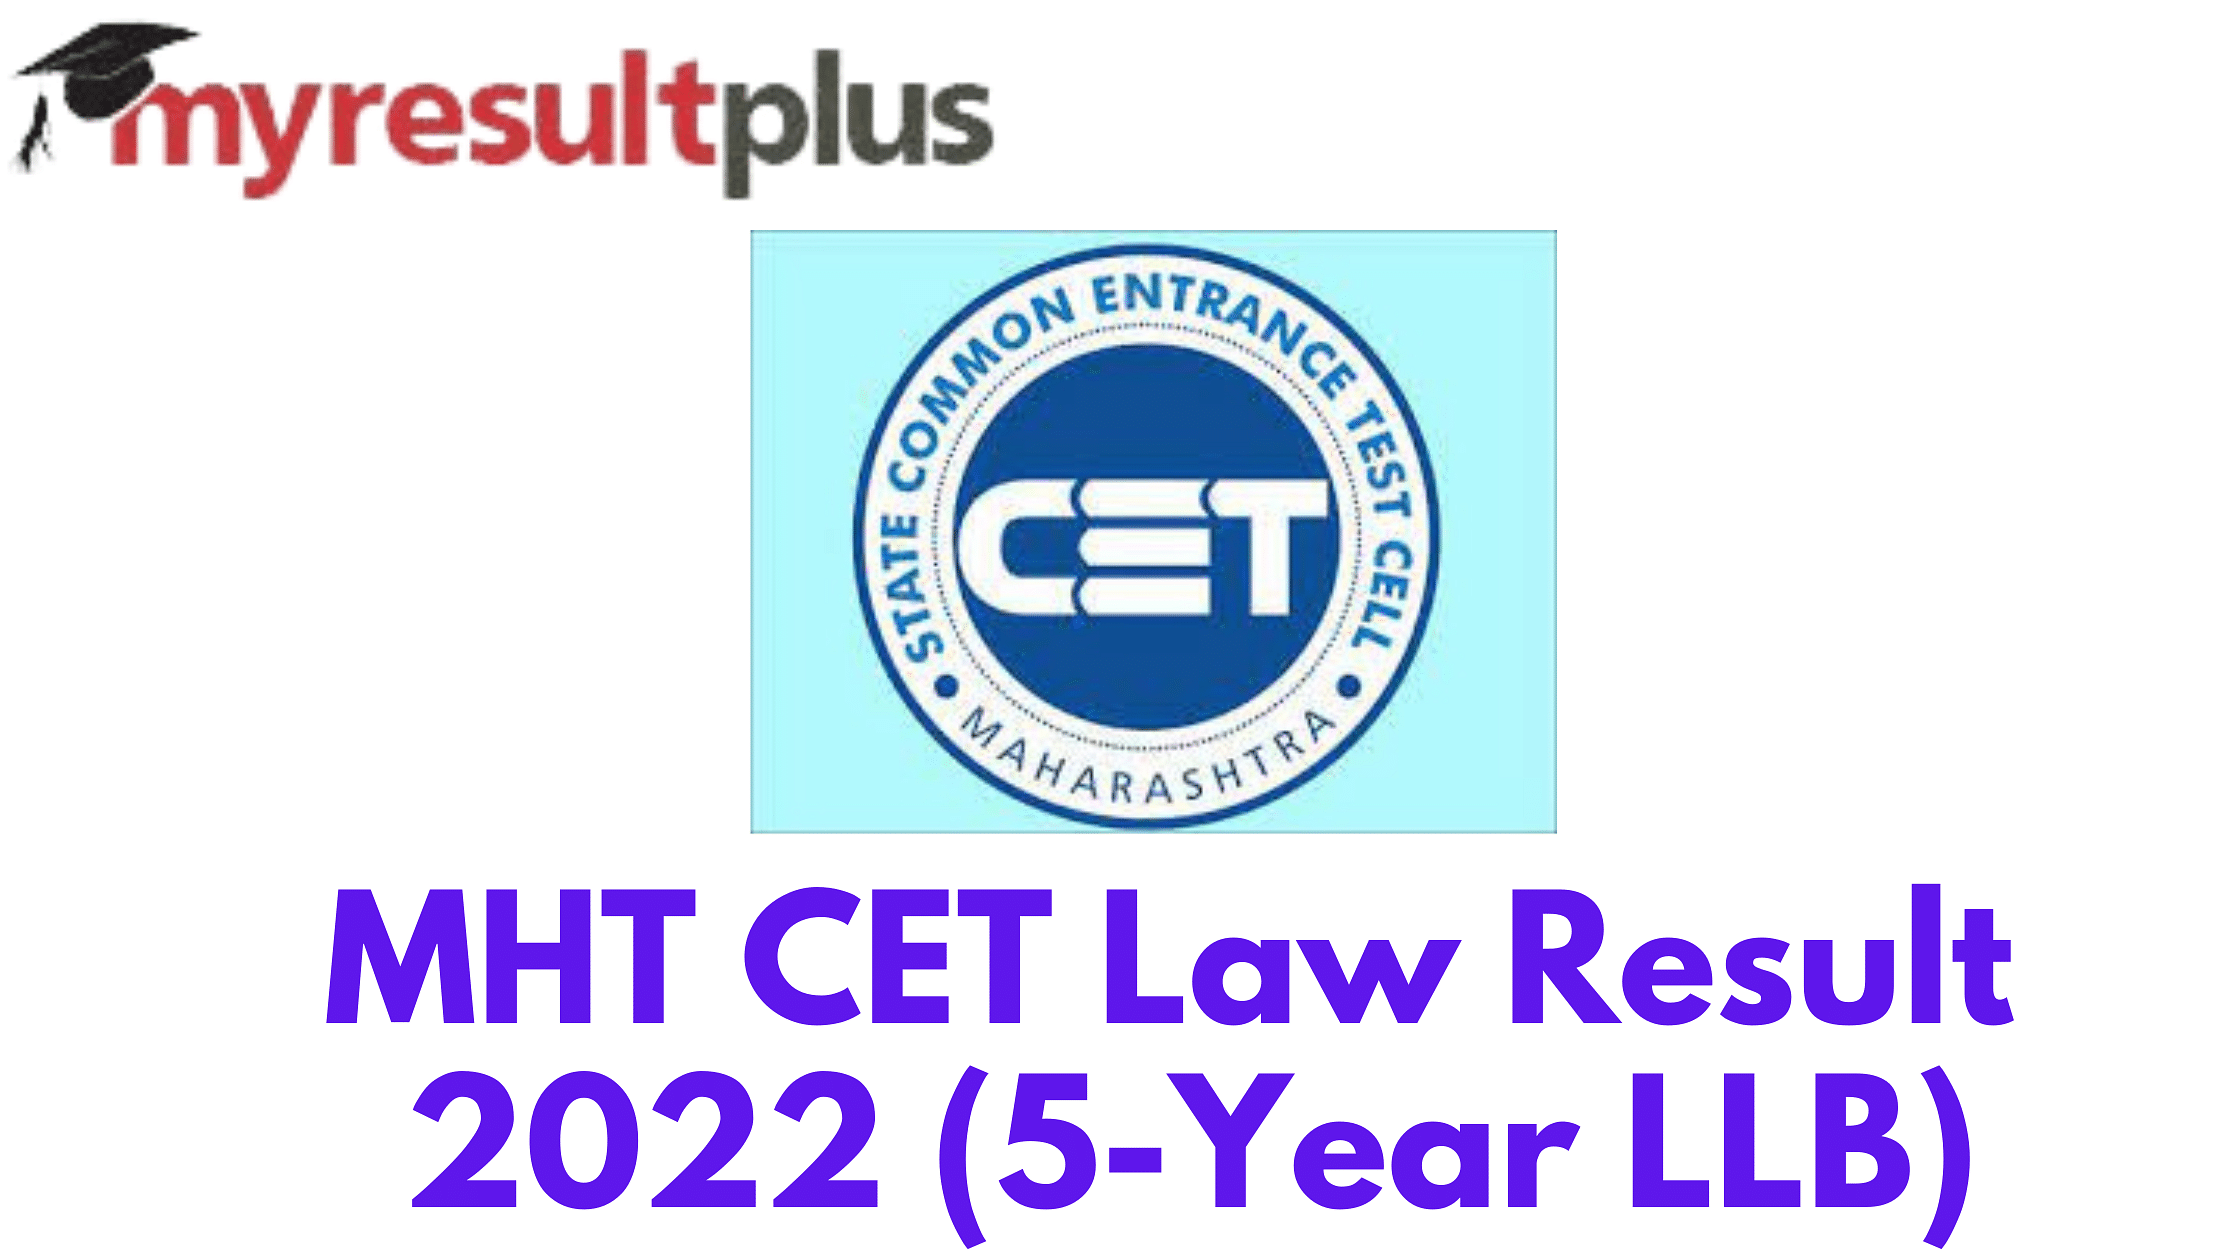 MHT CET Law Result 2022 Out for 5-Year LLB, Steps to Download Scorecard Here